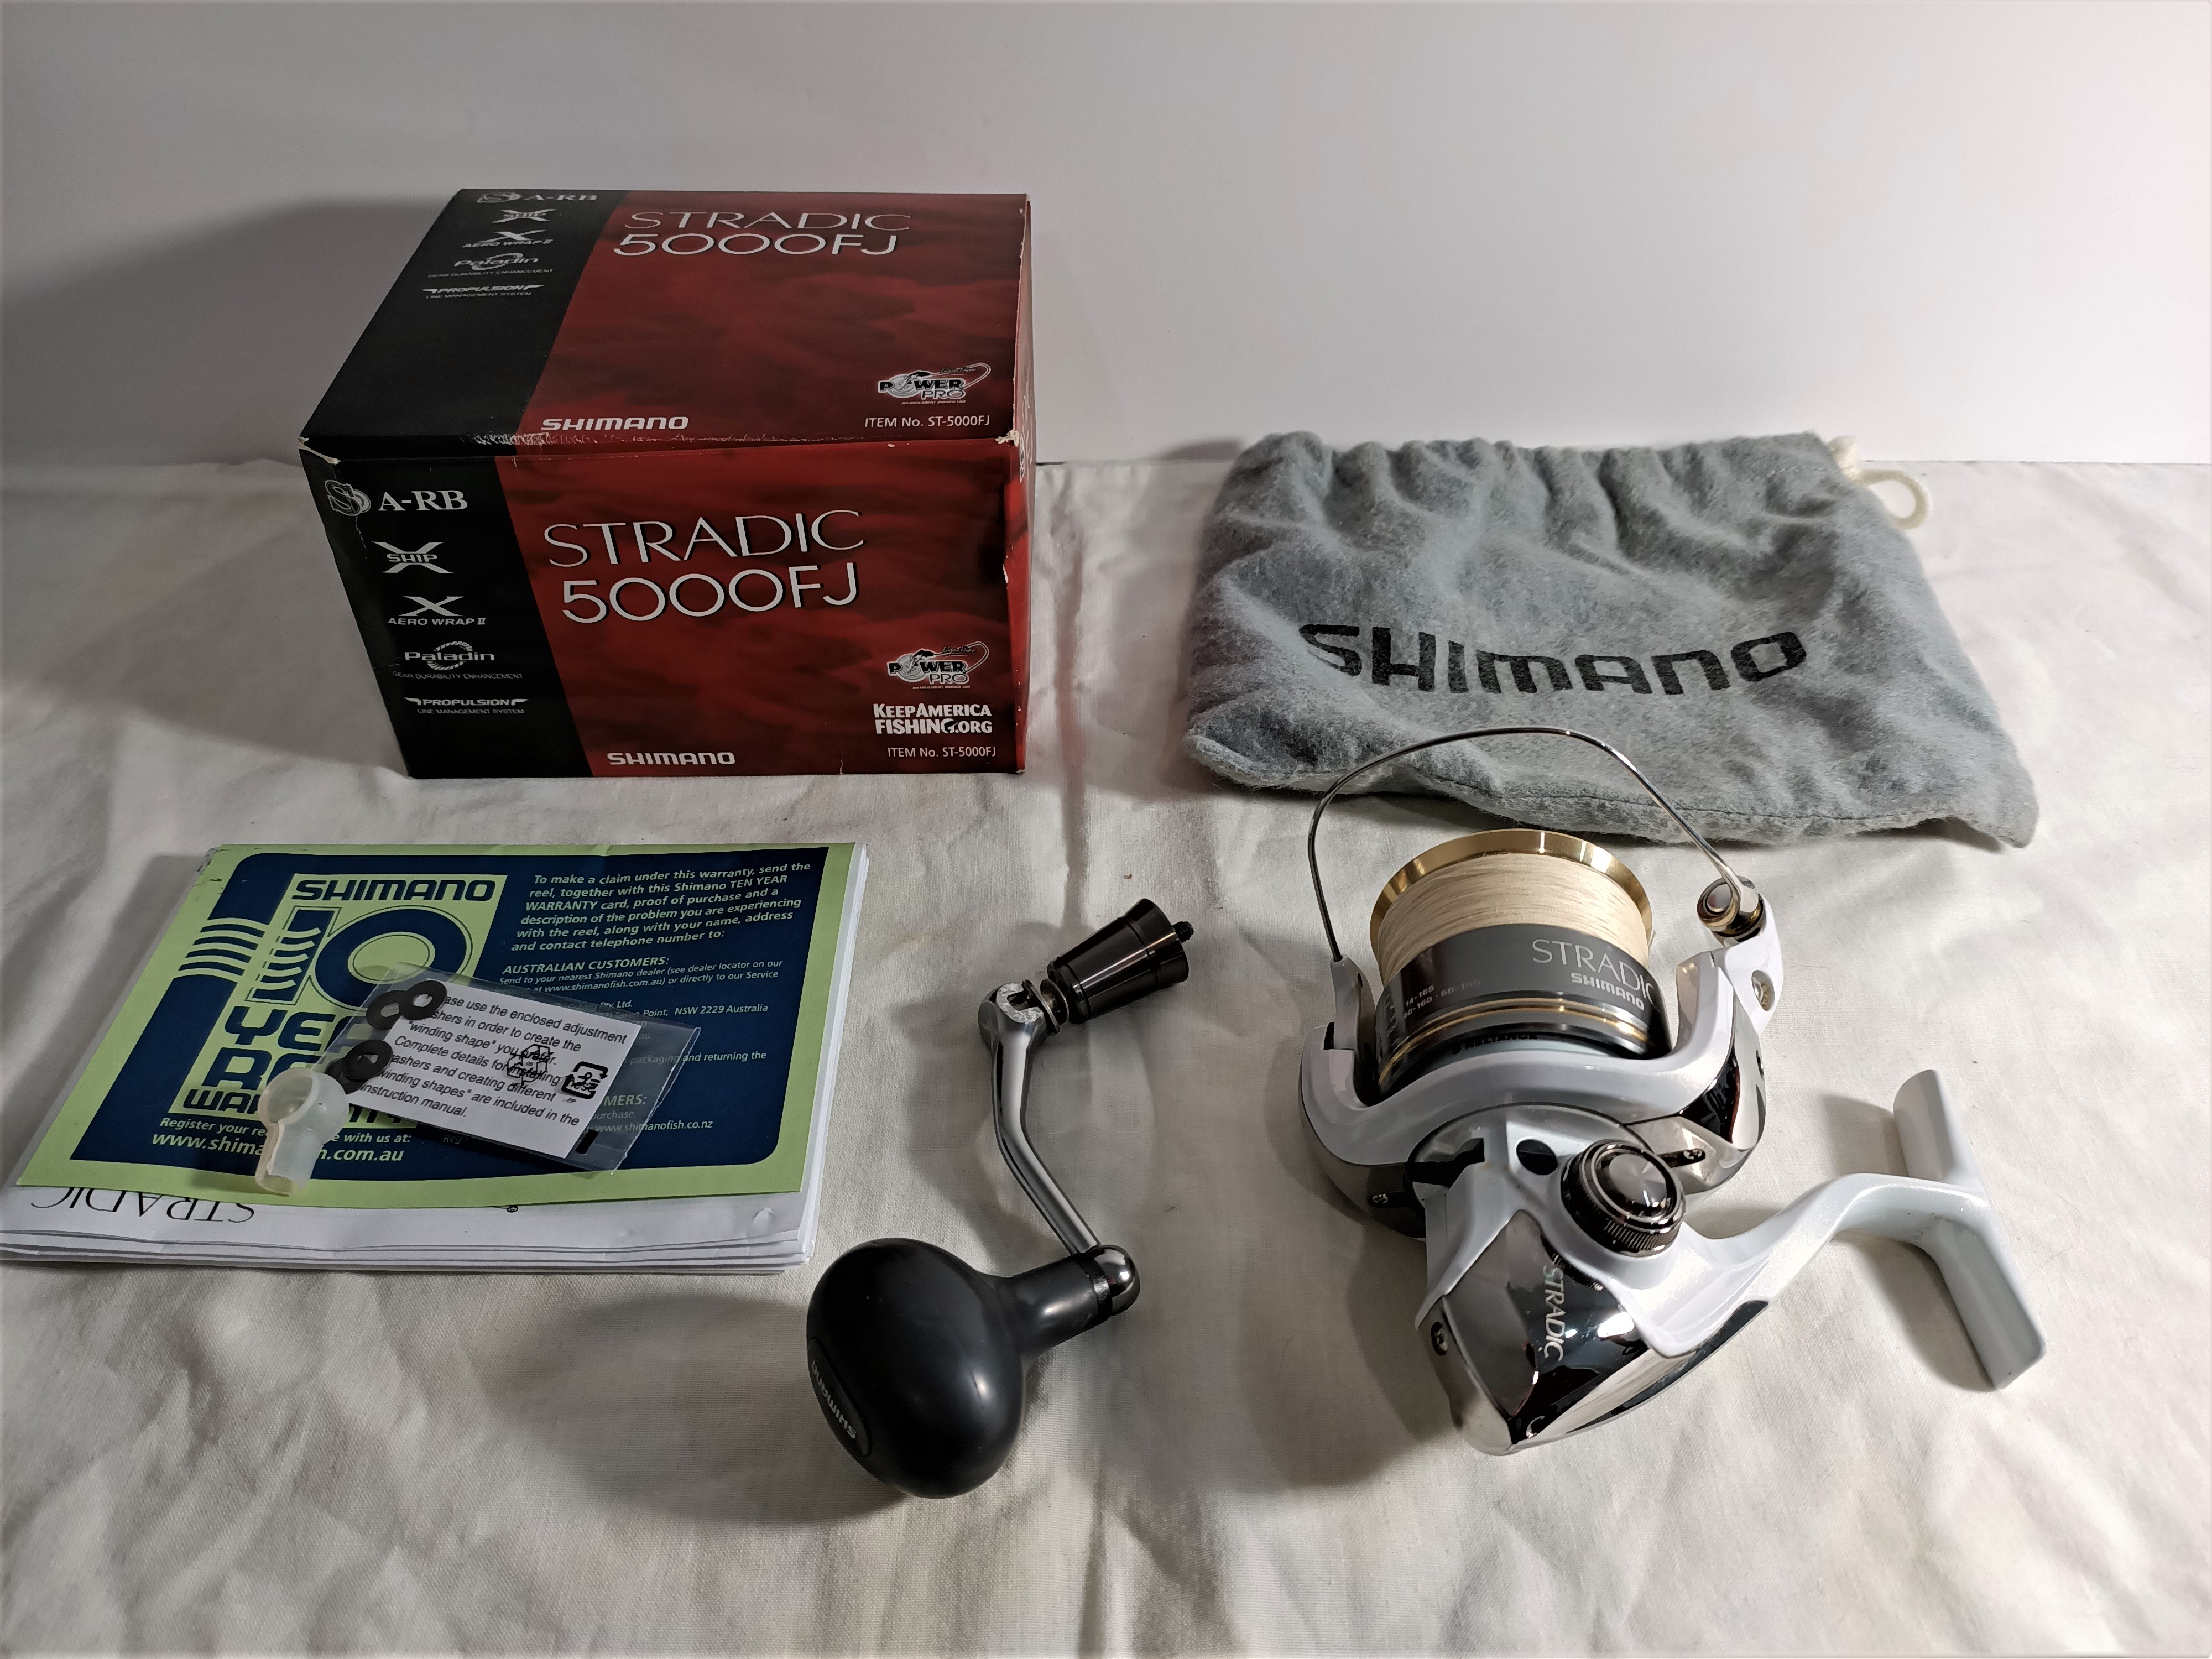 Shimano ST-5000FJ Stradic Spinning Reel OEM Replacement Parts From